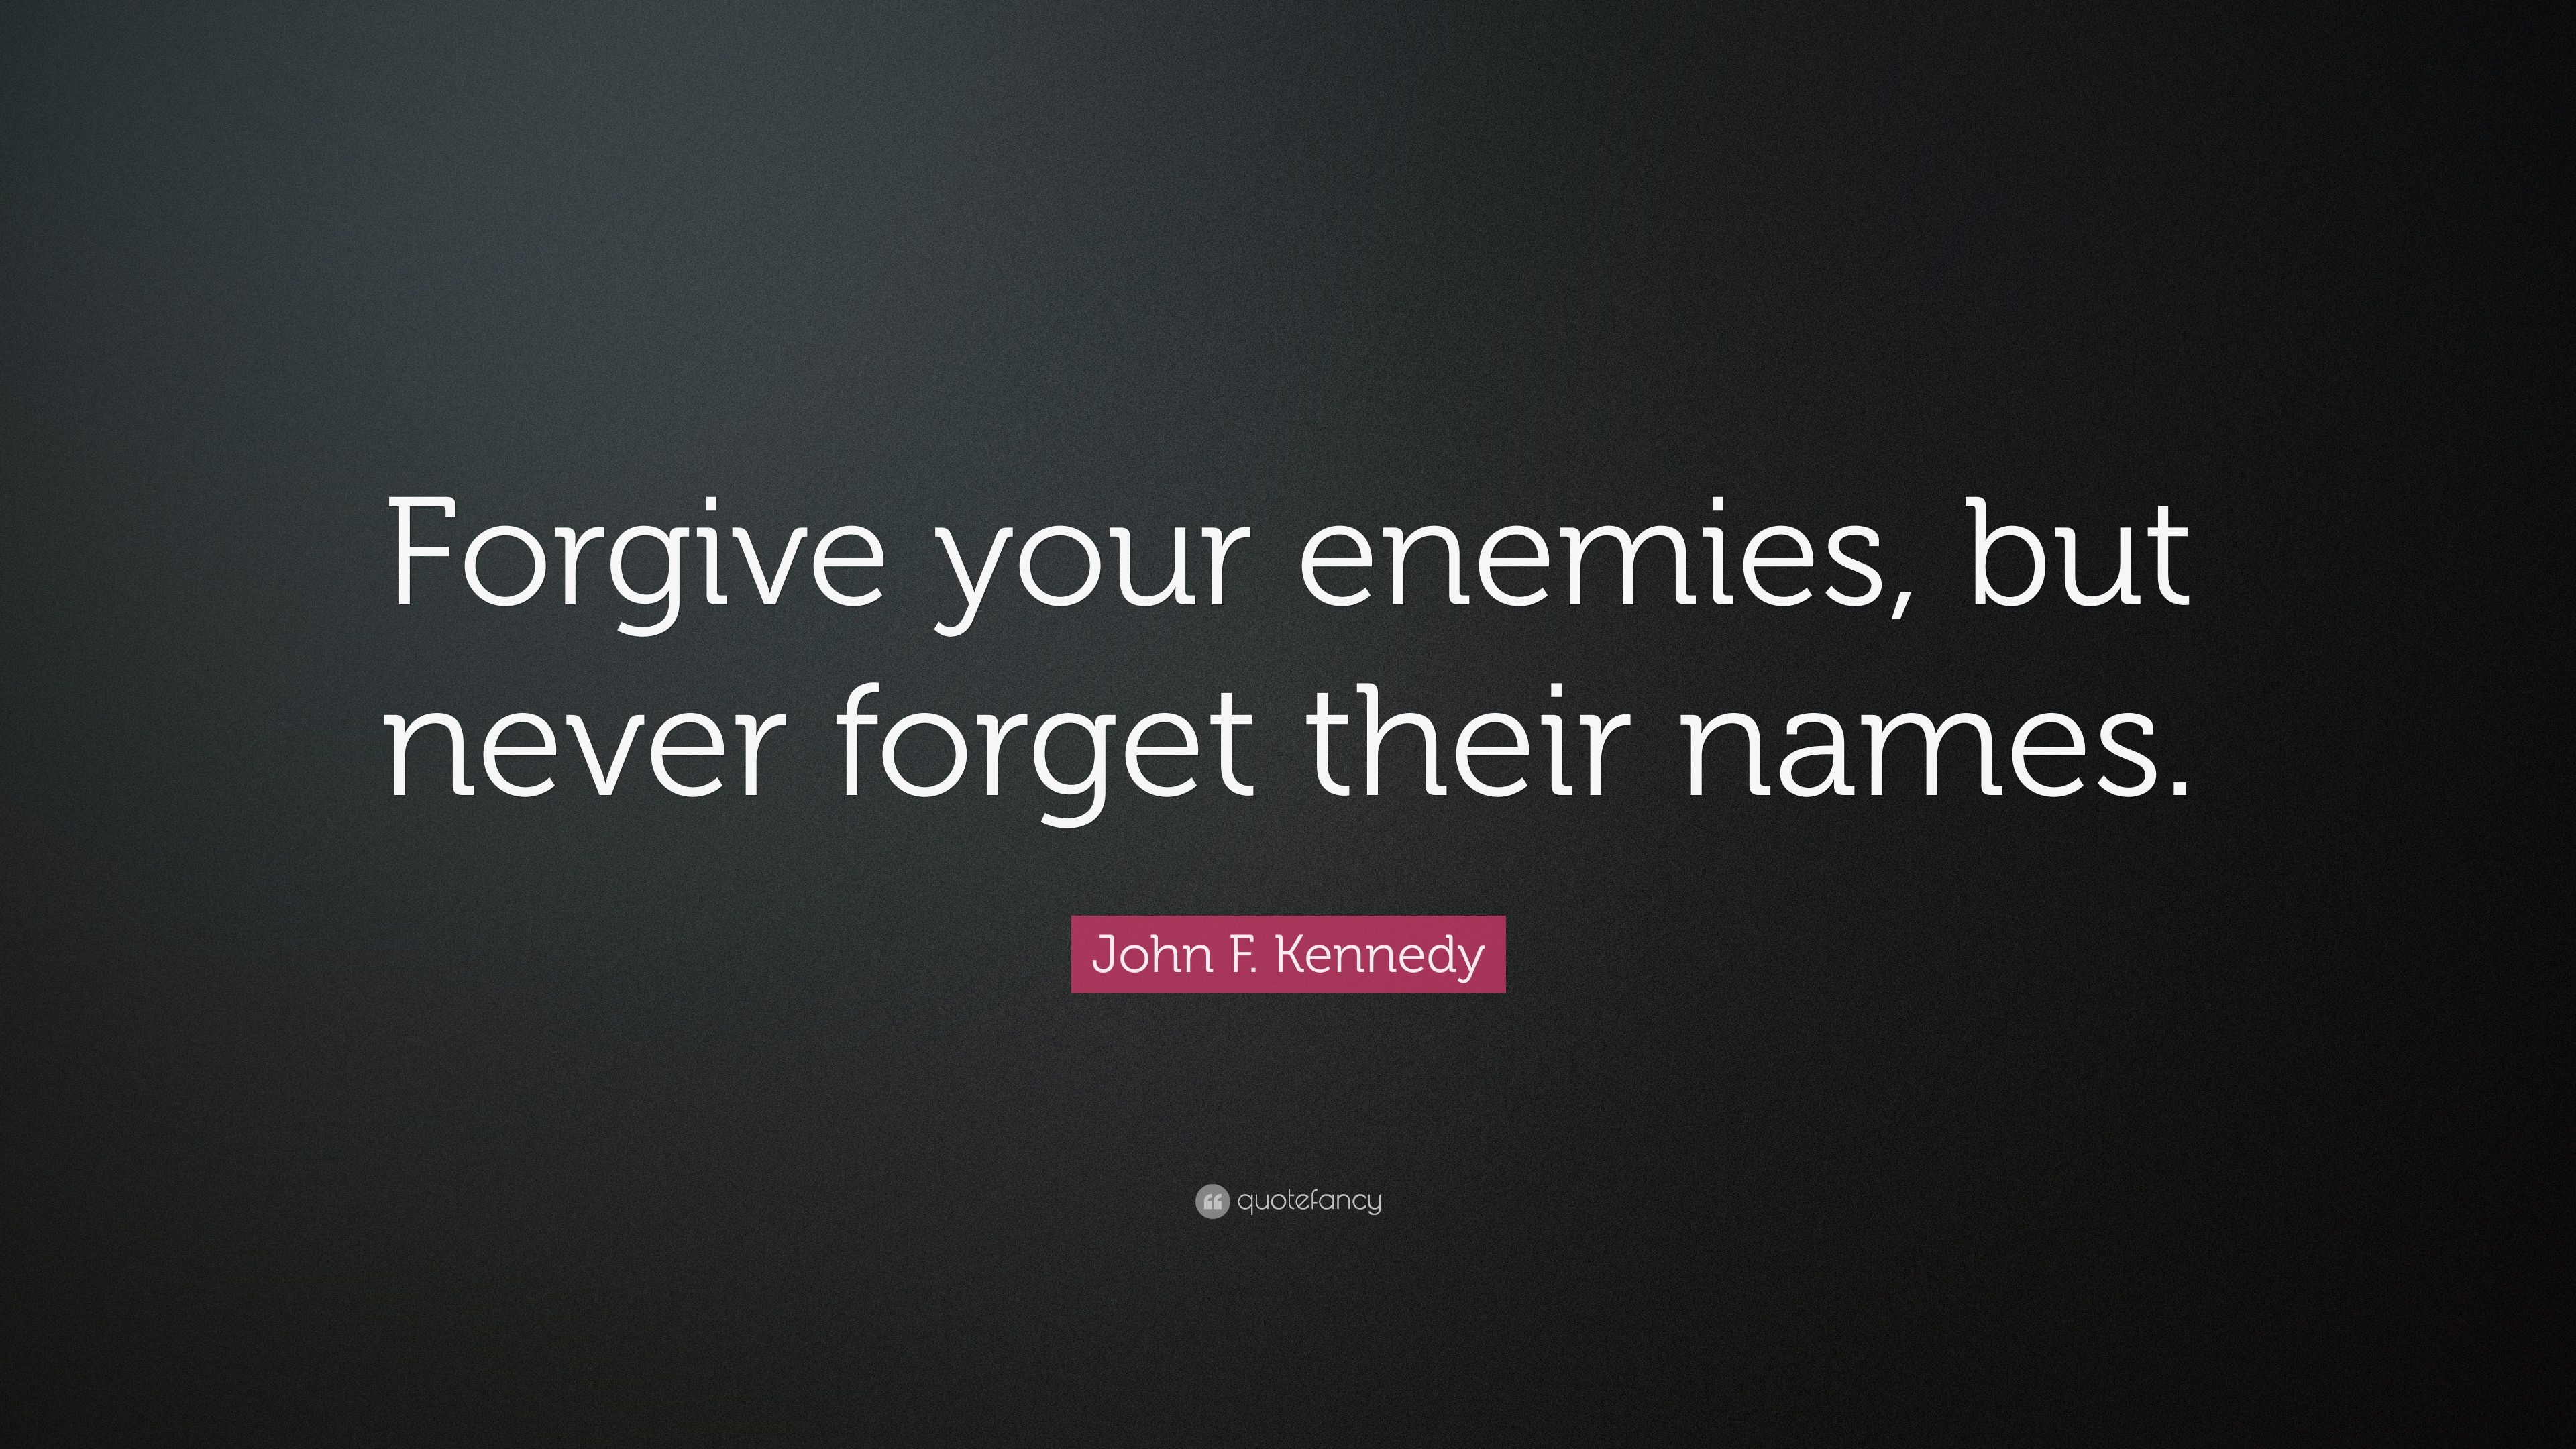 John F. Kennedy Quote: “Forgive your enemies, but never forget